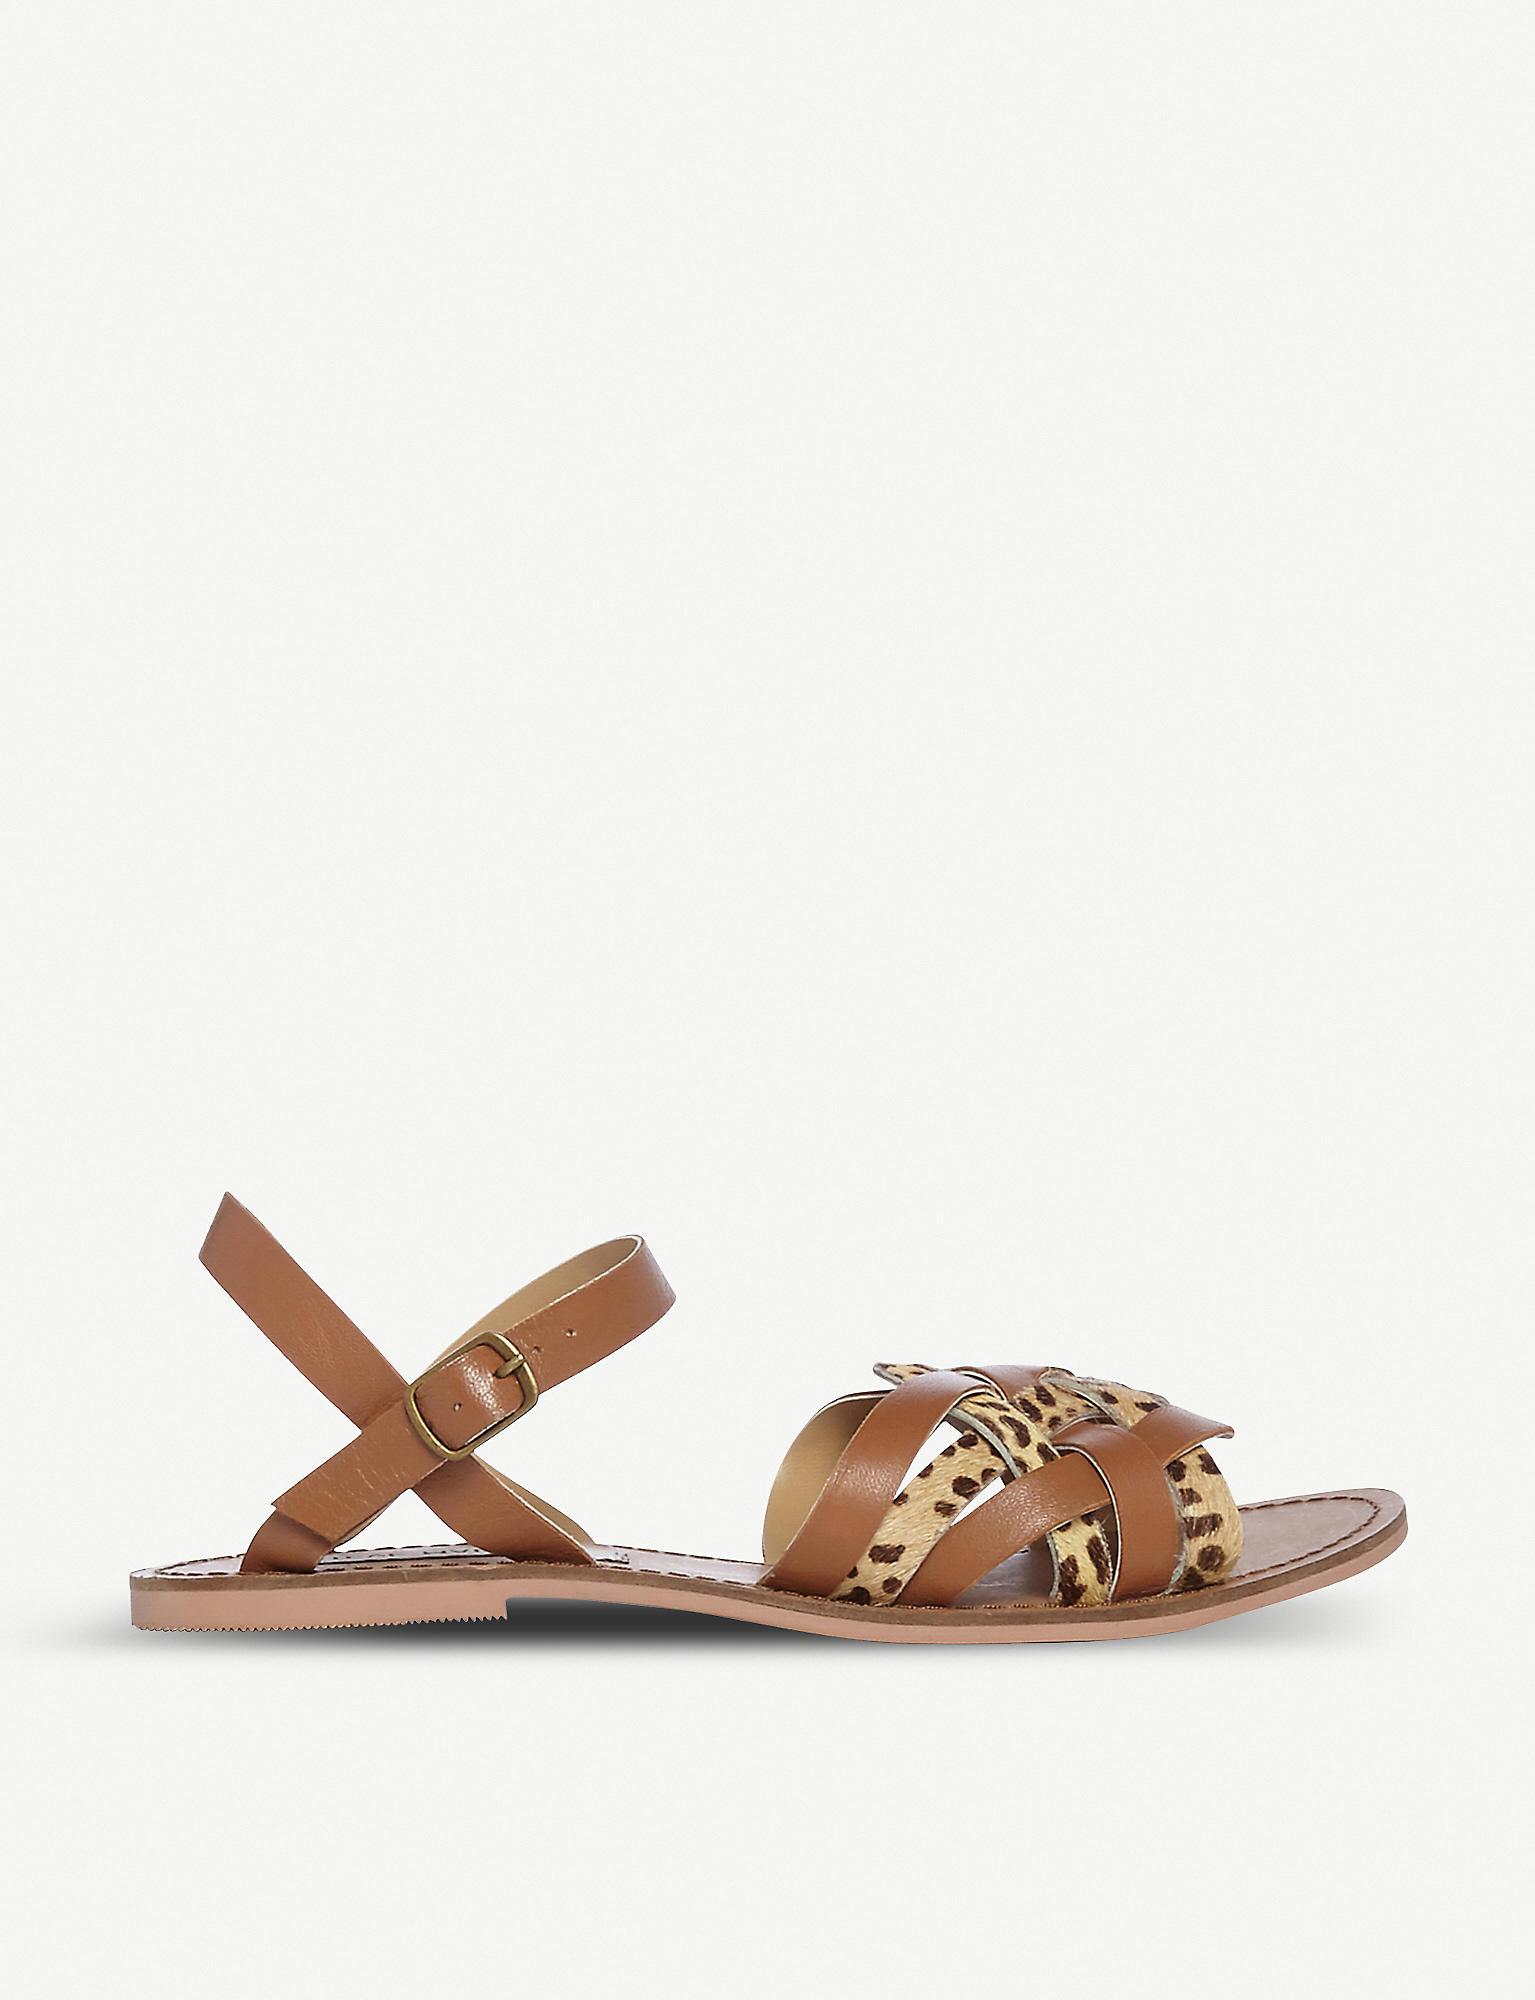 Steve Madden Oscar Leather Sandals in Tan-Leather (Brown) - Lyst